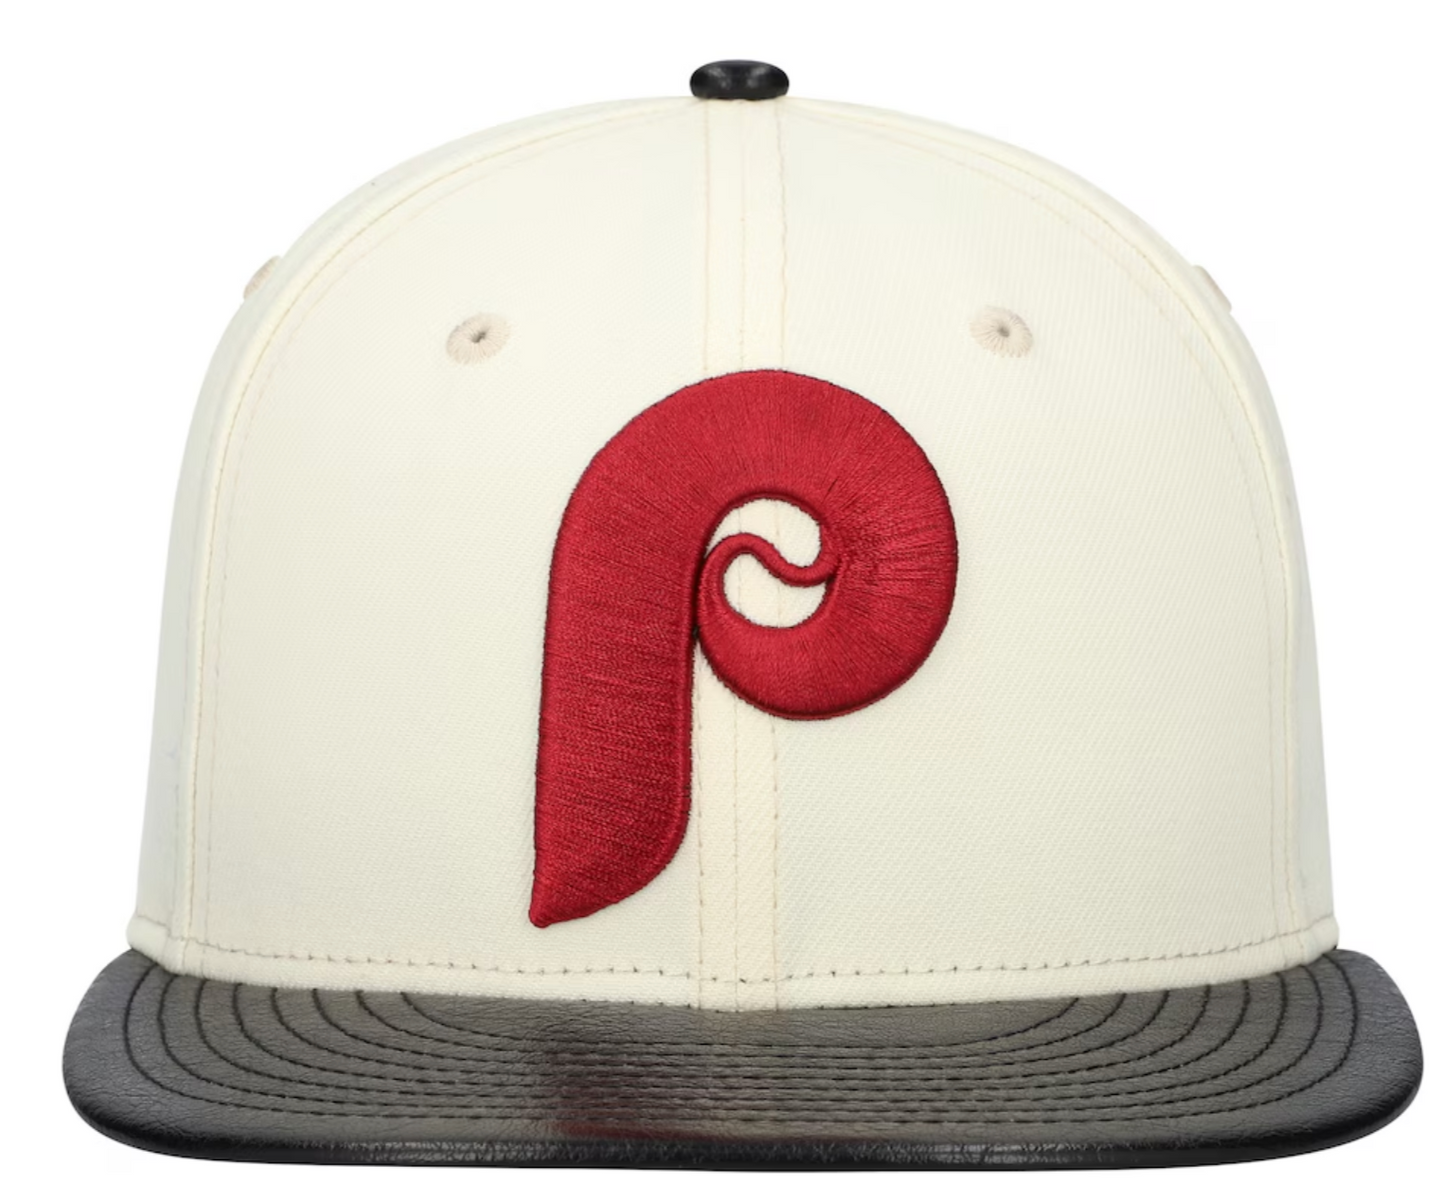 Philadelphia Phillies Cooperstown Collection Cream/Black Leather Visor New Era 59FIFTY Fitted Hat